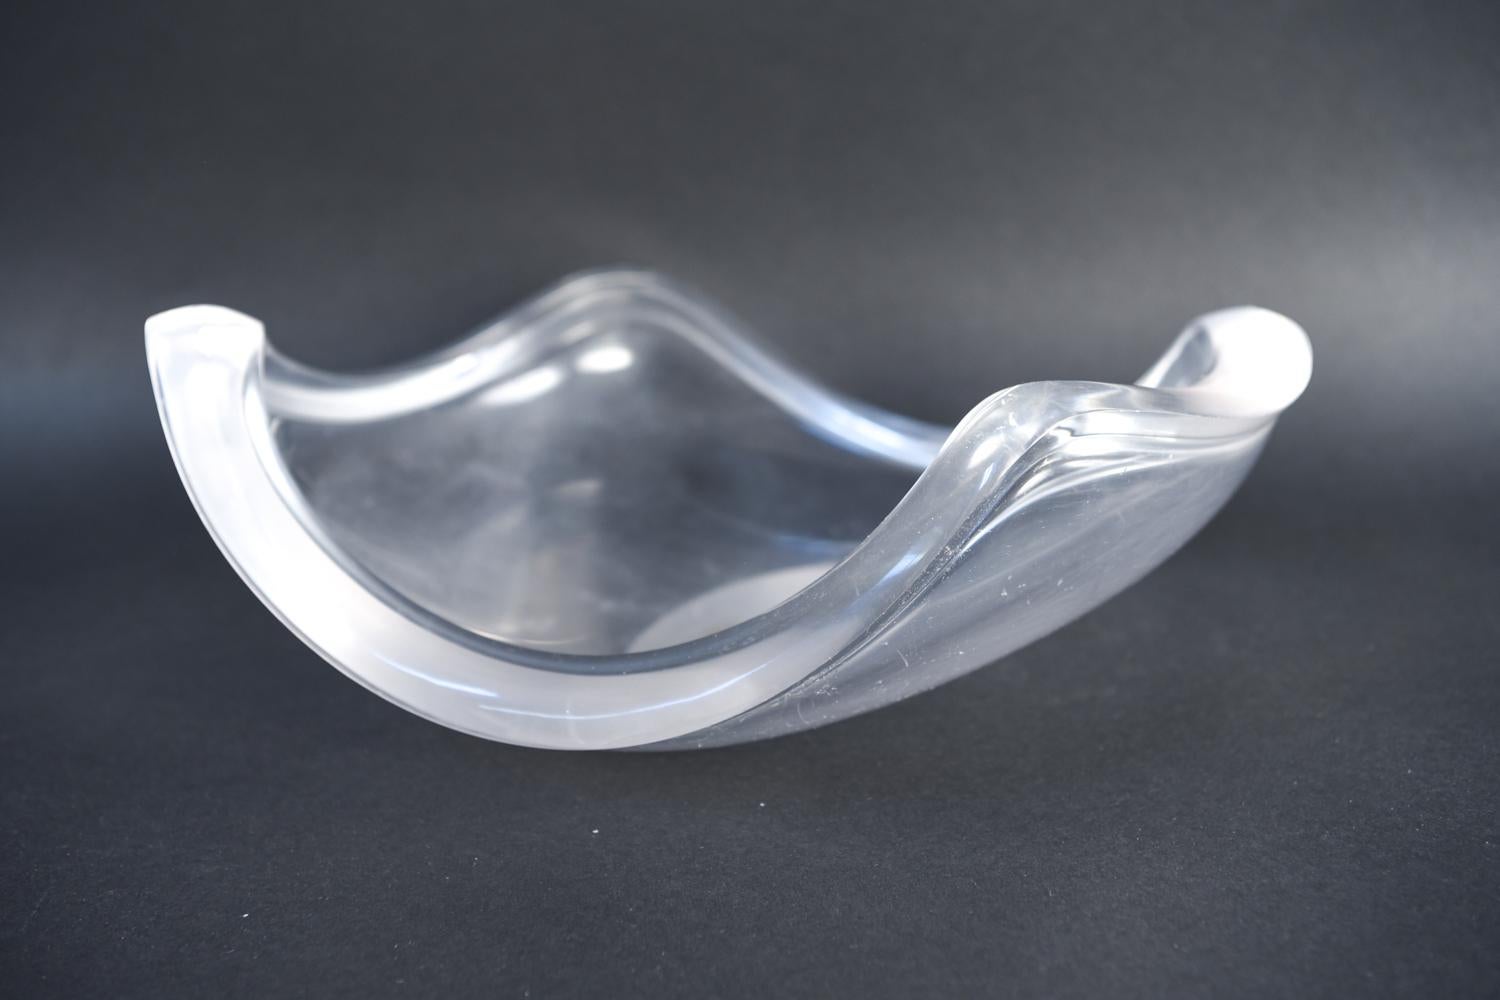 Mid-20th Century Midcentury Sculptural Lucite Centerpiece Bowl, Attributed to Astrolite-Ritts Co.